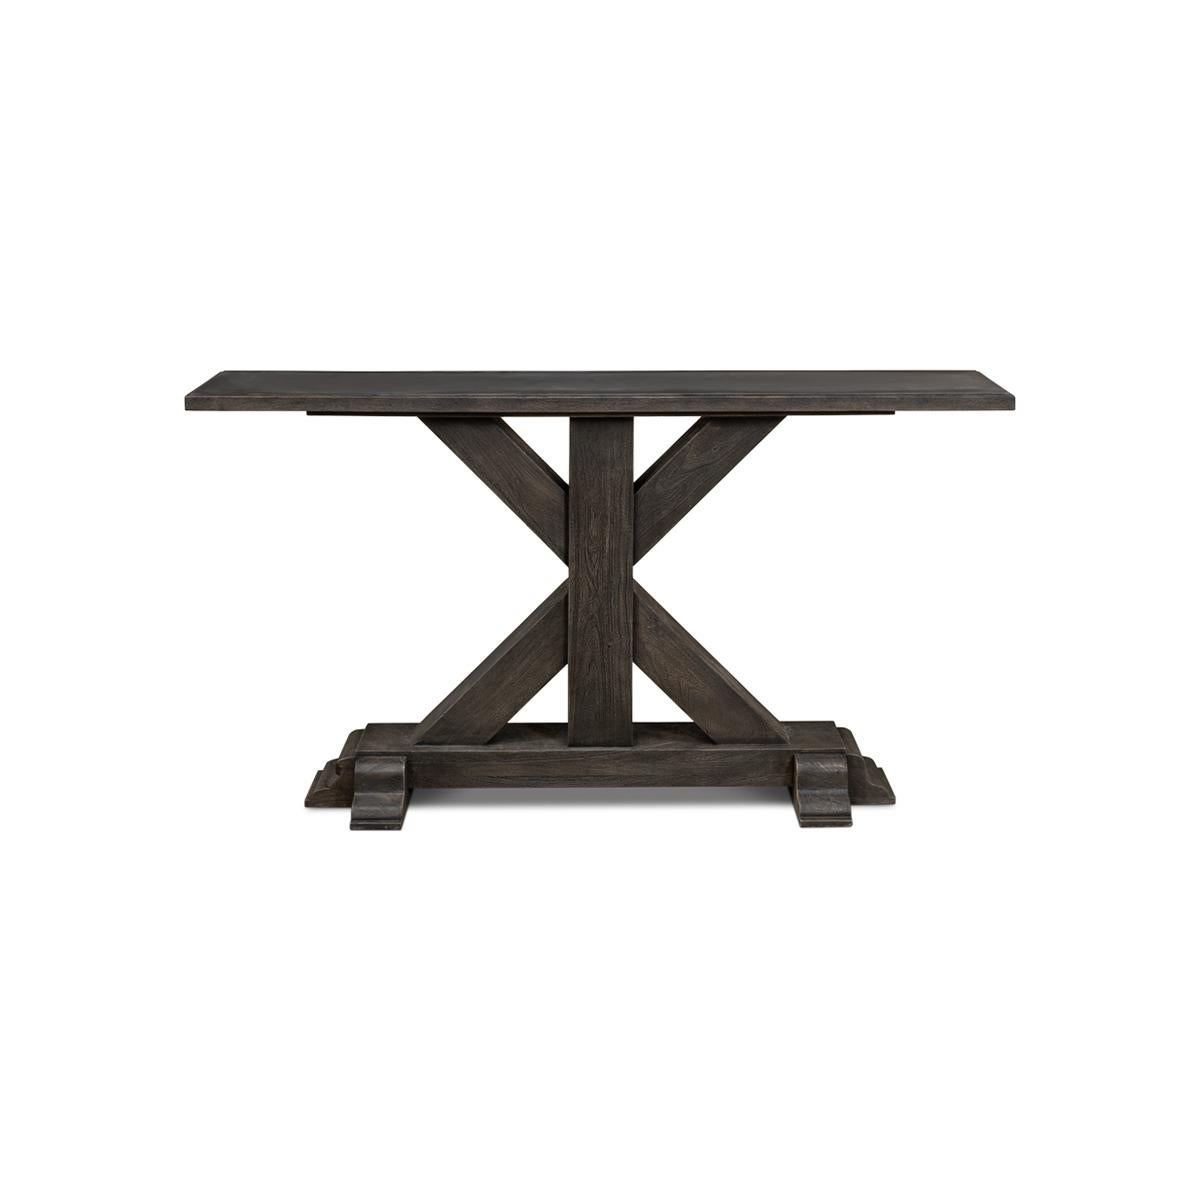 The Rustic grey industrial console is the perfect blend of vintage charm and modern functionality. The console features an inset iron slab top that adds a unique industrial touch to the piece. The iron slab top is supported by a bold X frame base